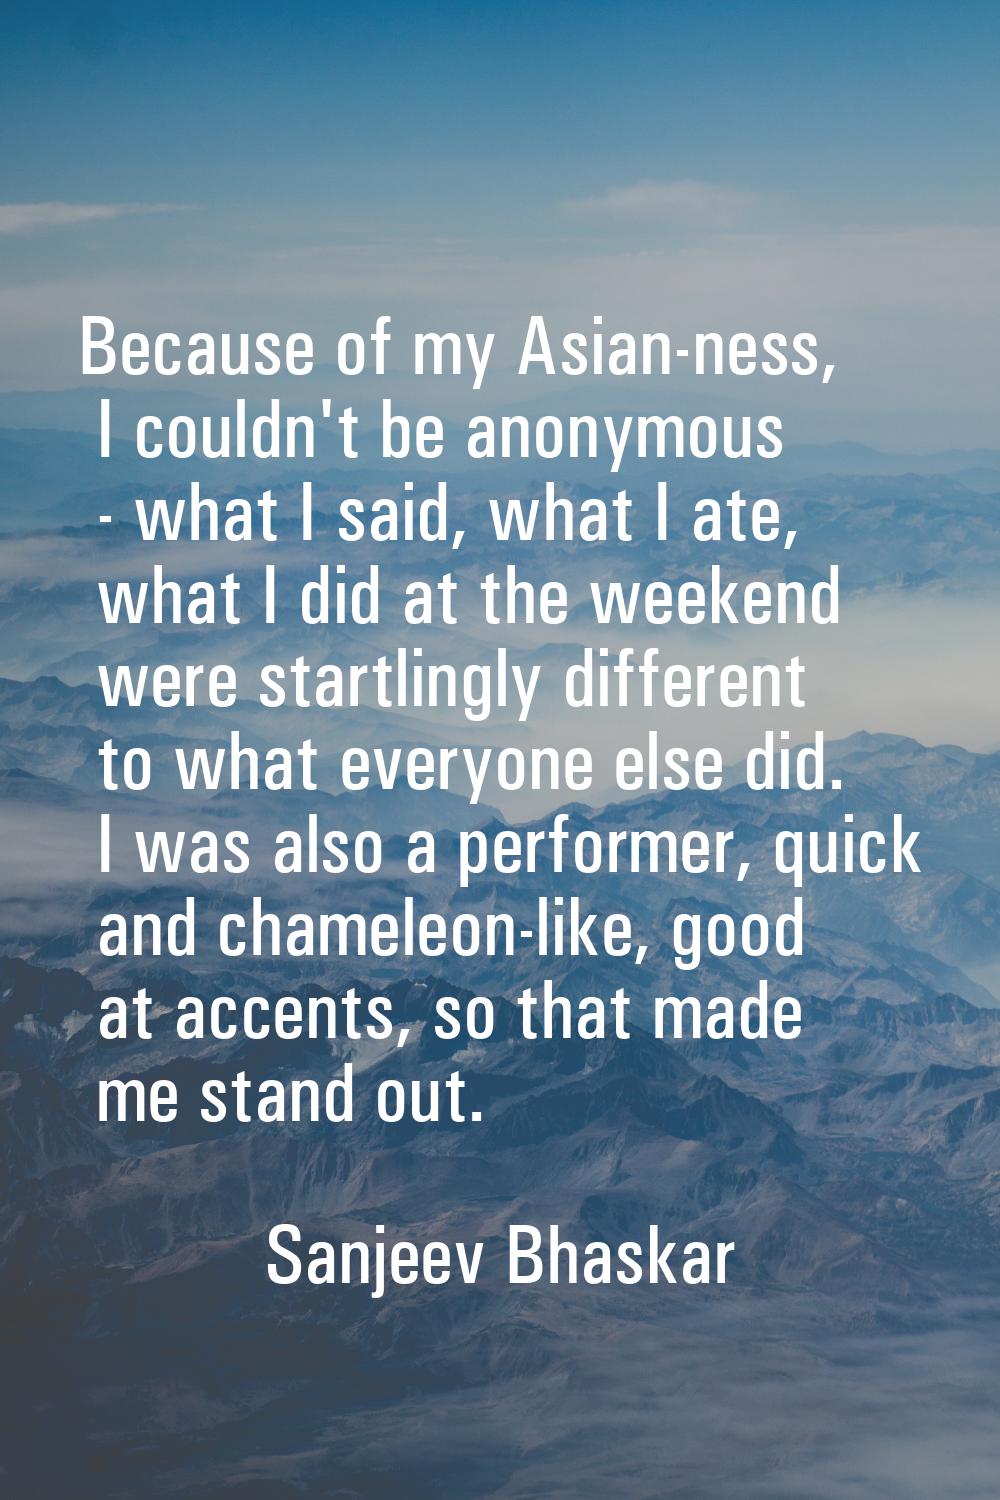 Because of my Asian-ness, I couldn't be anonymous - what I said, what I ate, what I did at the week